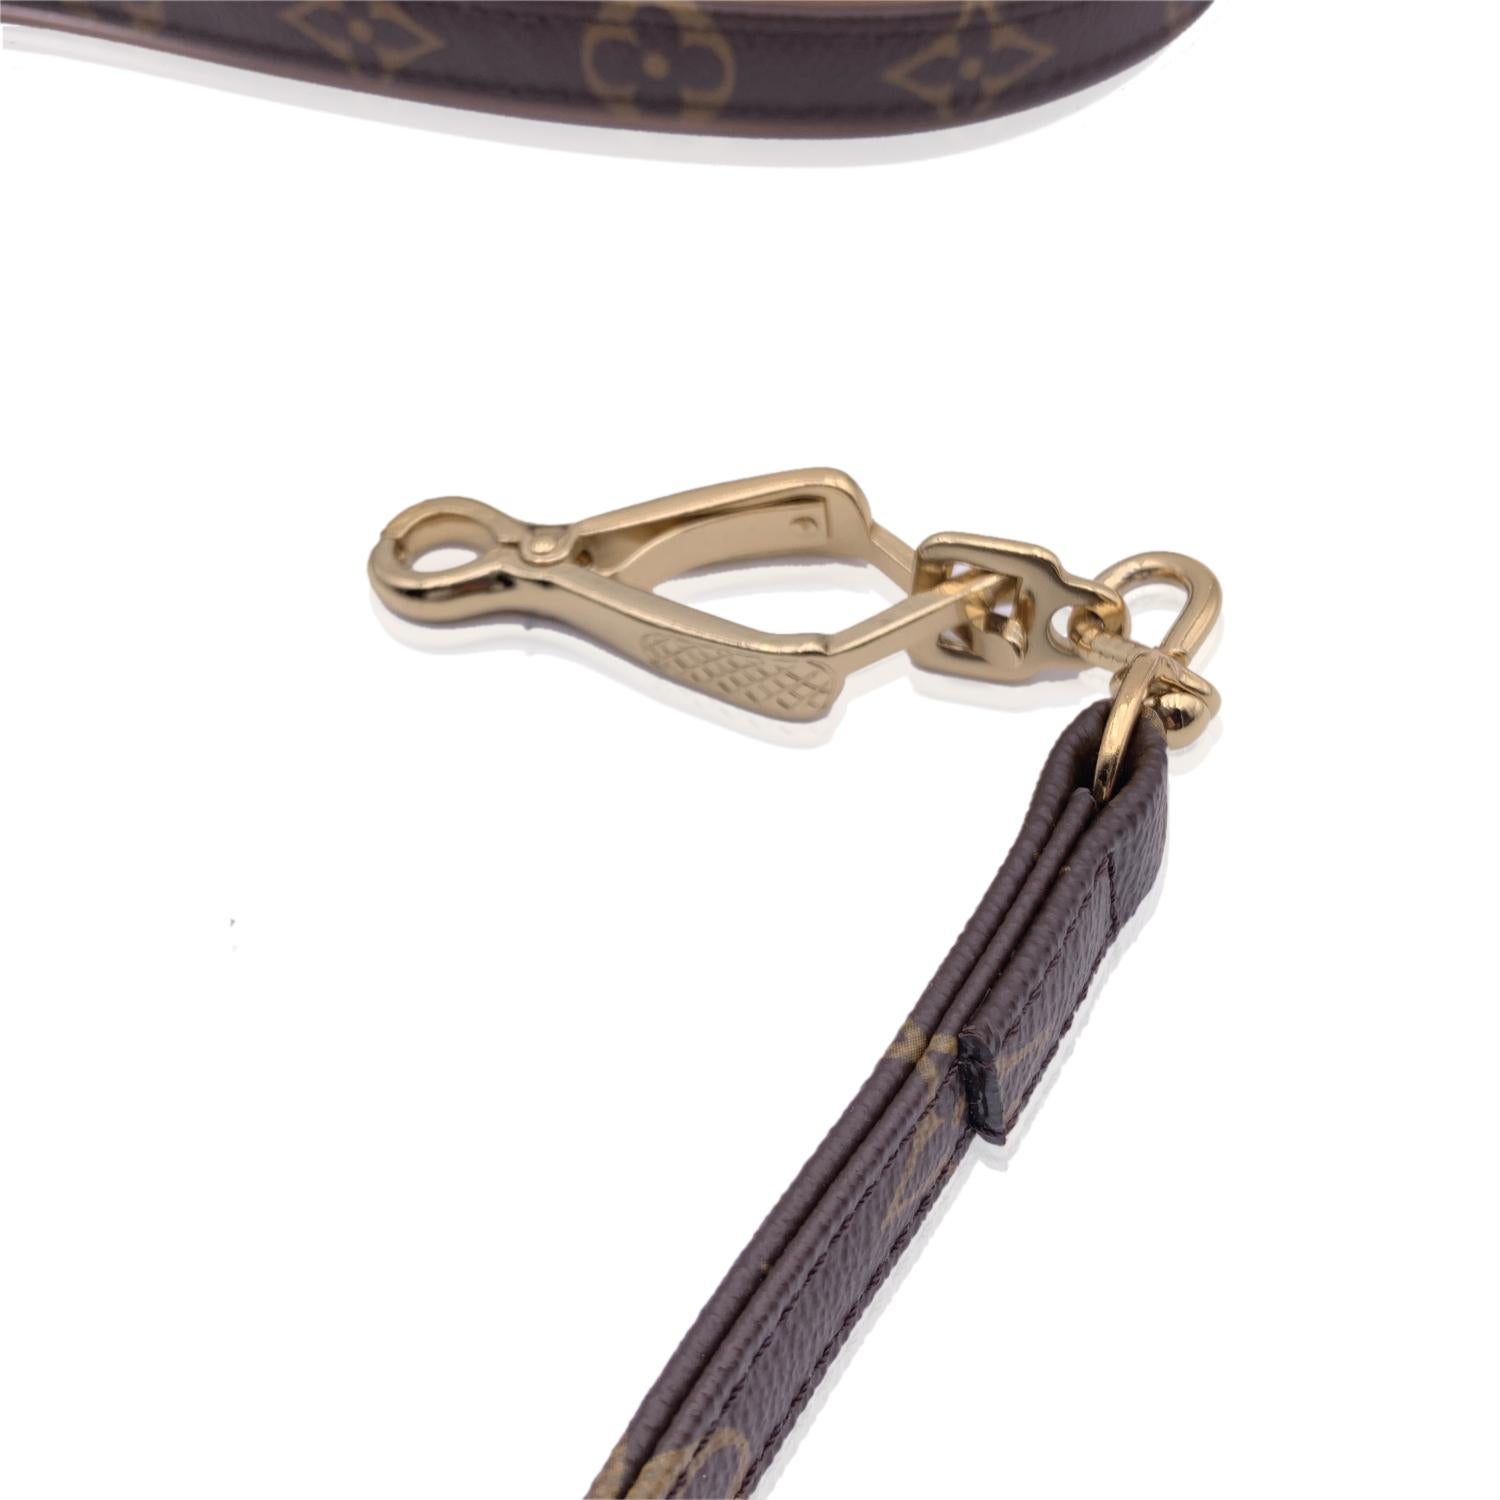 Louis Vuitton brown monogram canvas dog Baxter Leash MM. Natural cowhide leather trim. Gold metal hardware. For small or medium dogs. Total length: 41 inches - 104.2 cm. 'Louis Vuitton Paris' and 'Made in France' embossed on leather. Data code